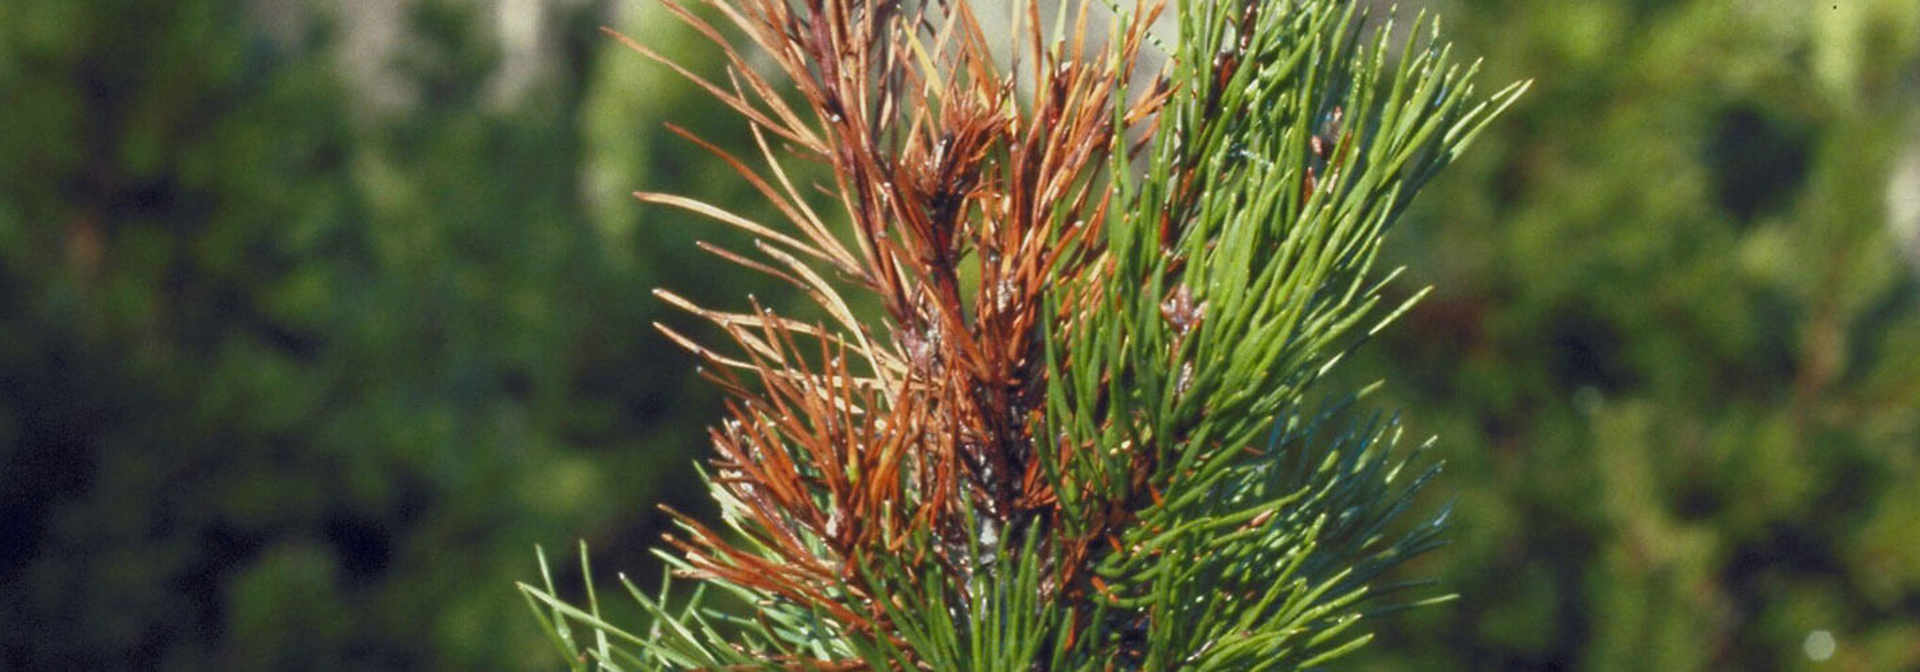 Pest And Disease Pitch Canker Of Pine Banner 1440X500